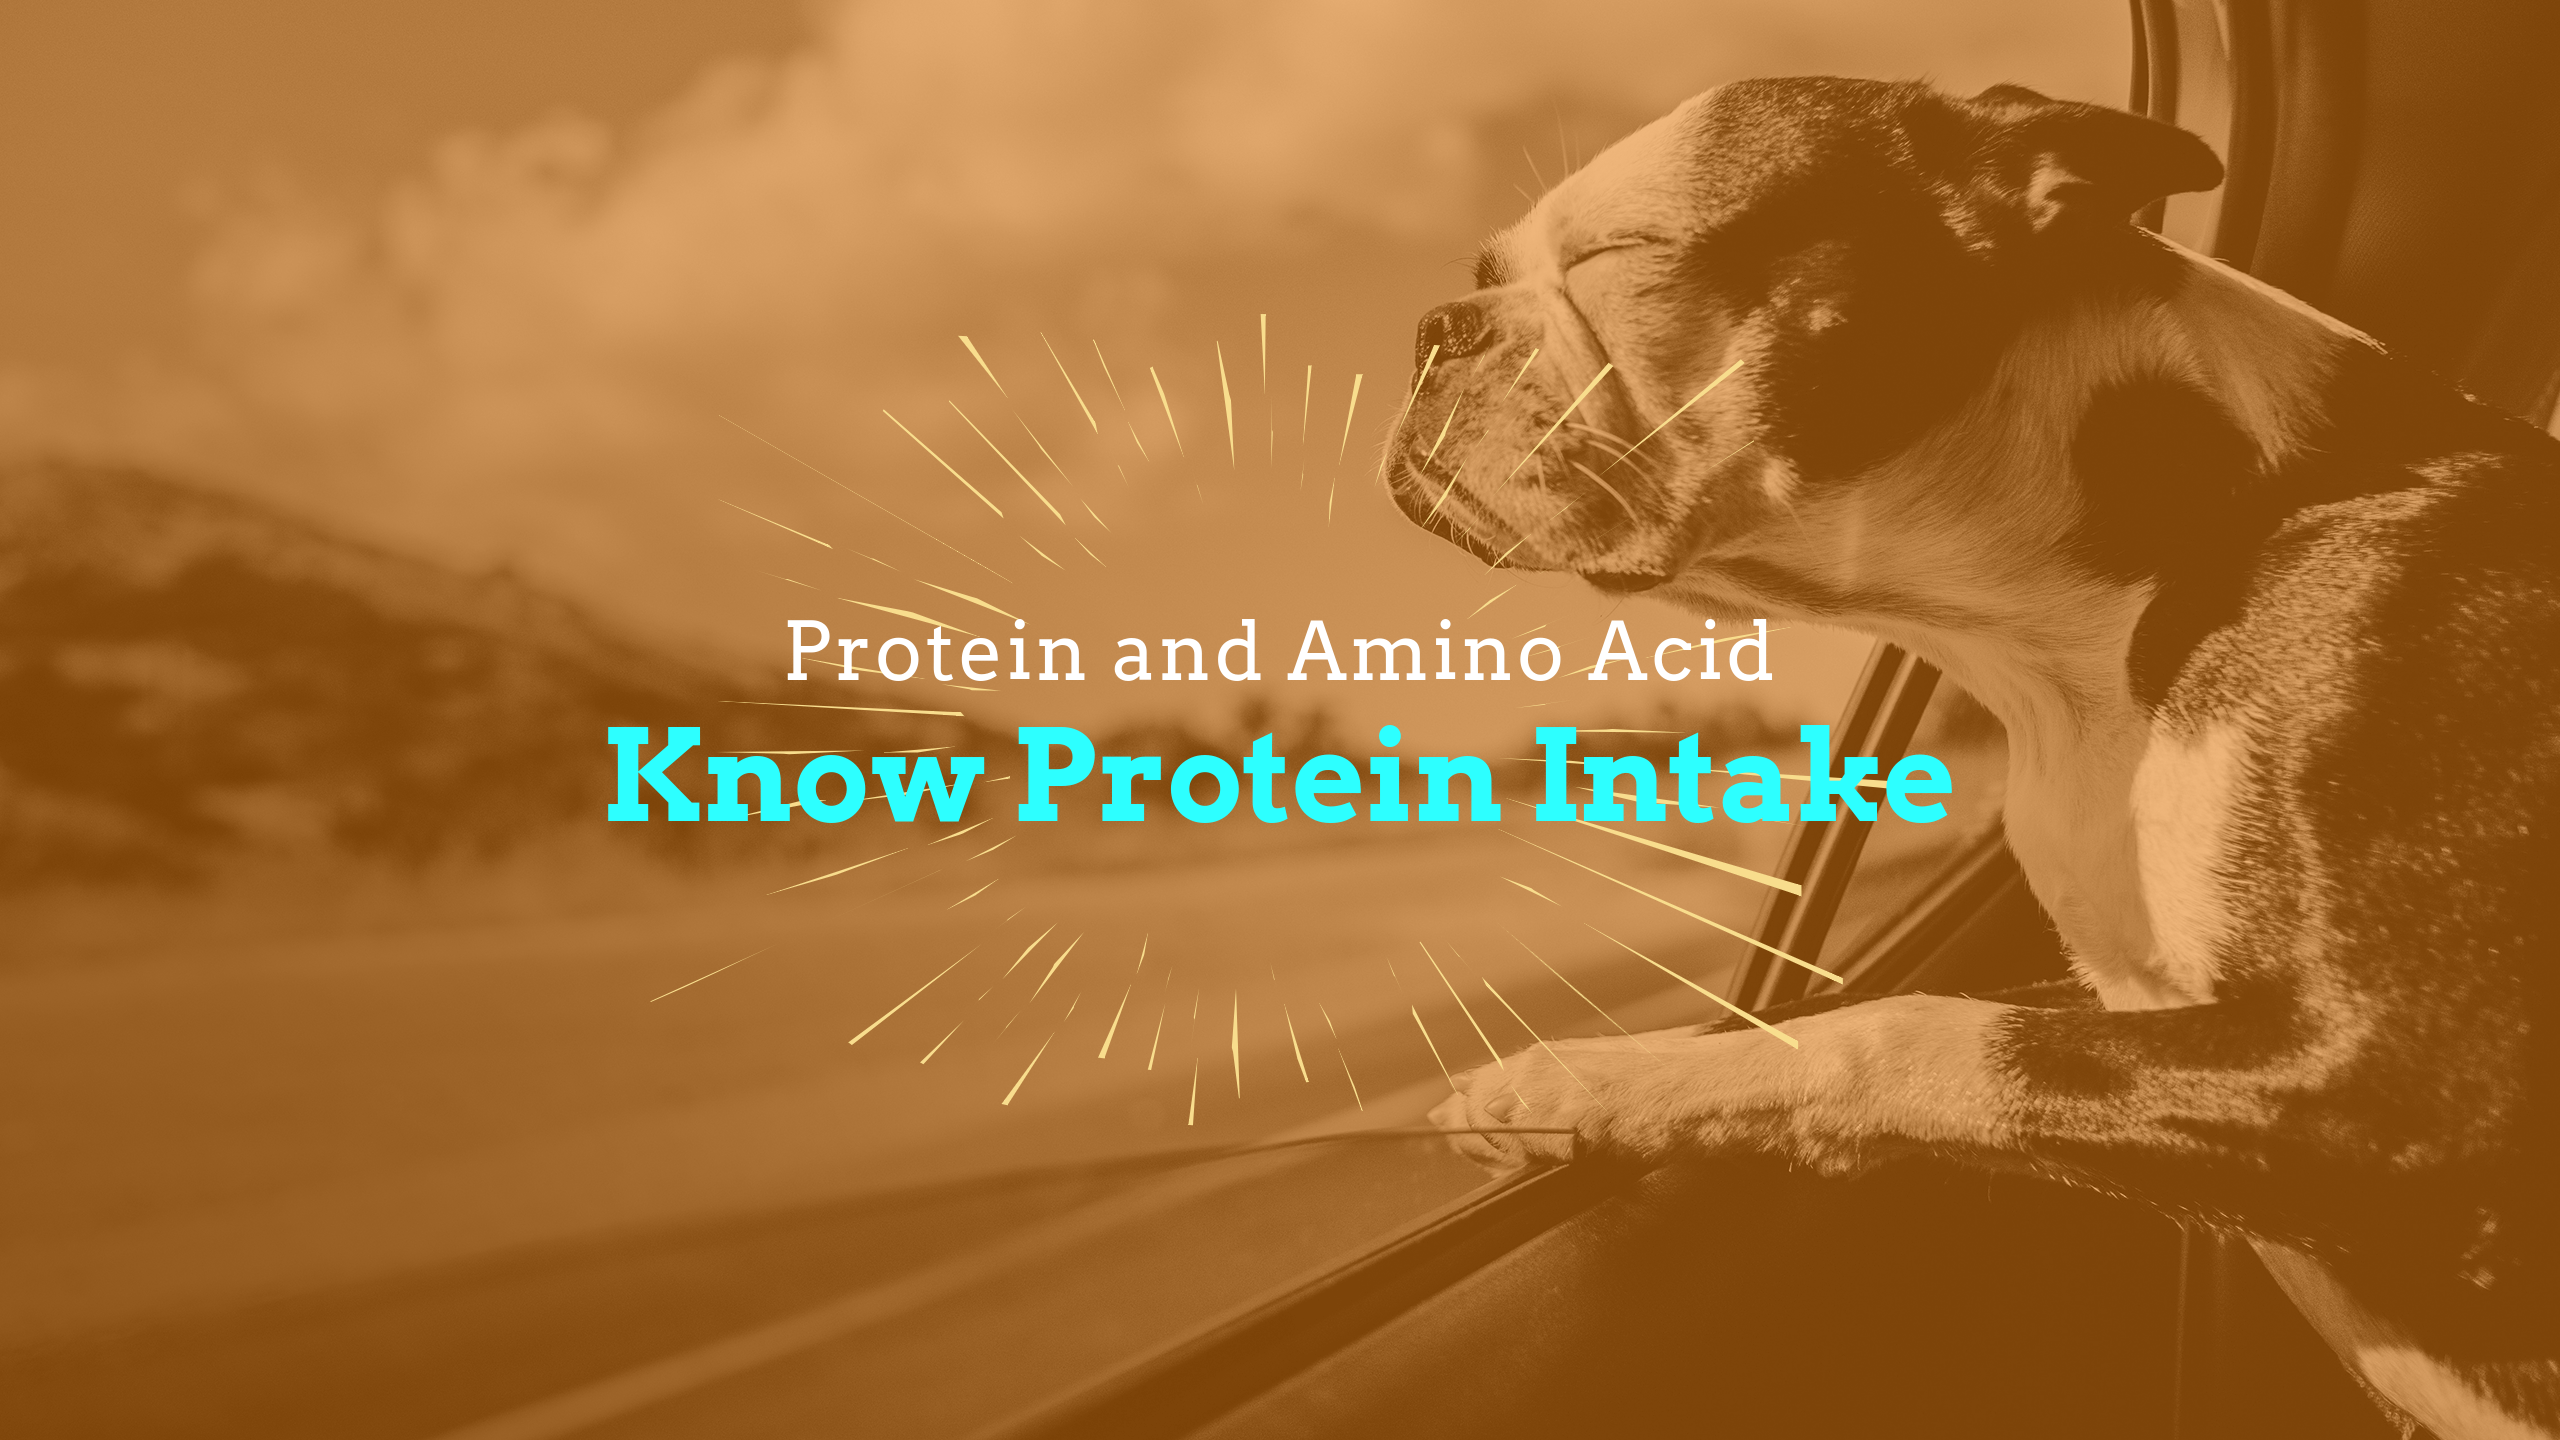 Protein and Amino Acid : Recommended amount of protein and amino acid intake for puppies